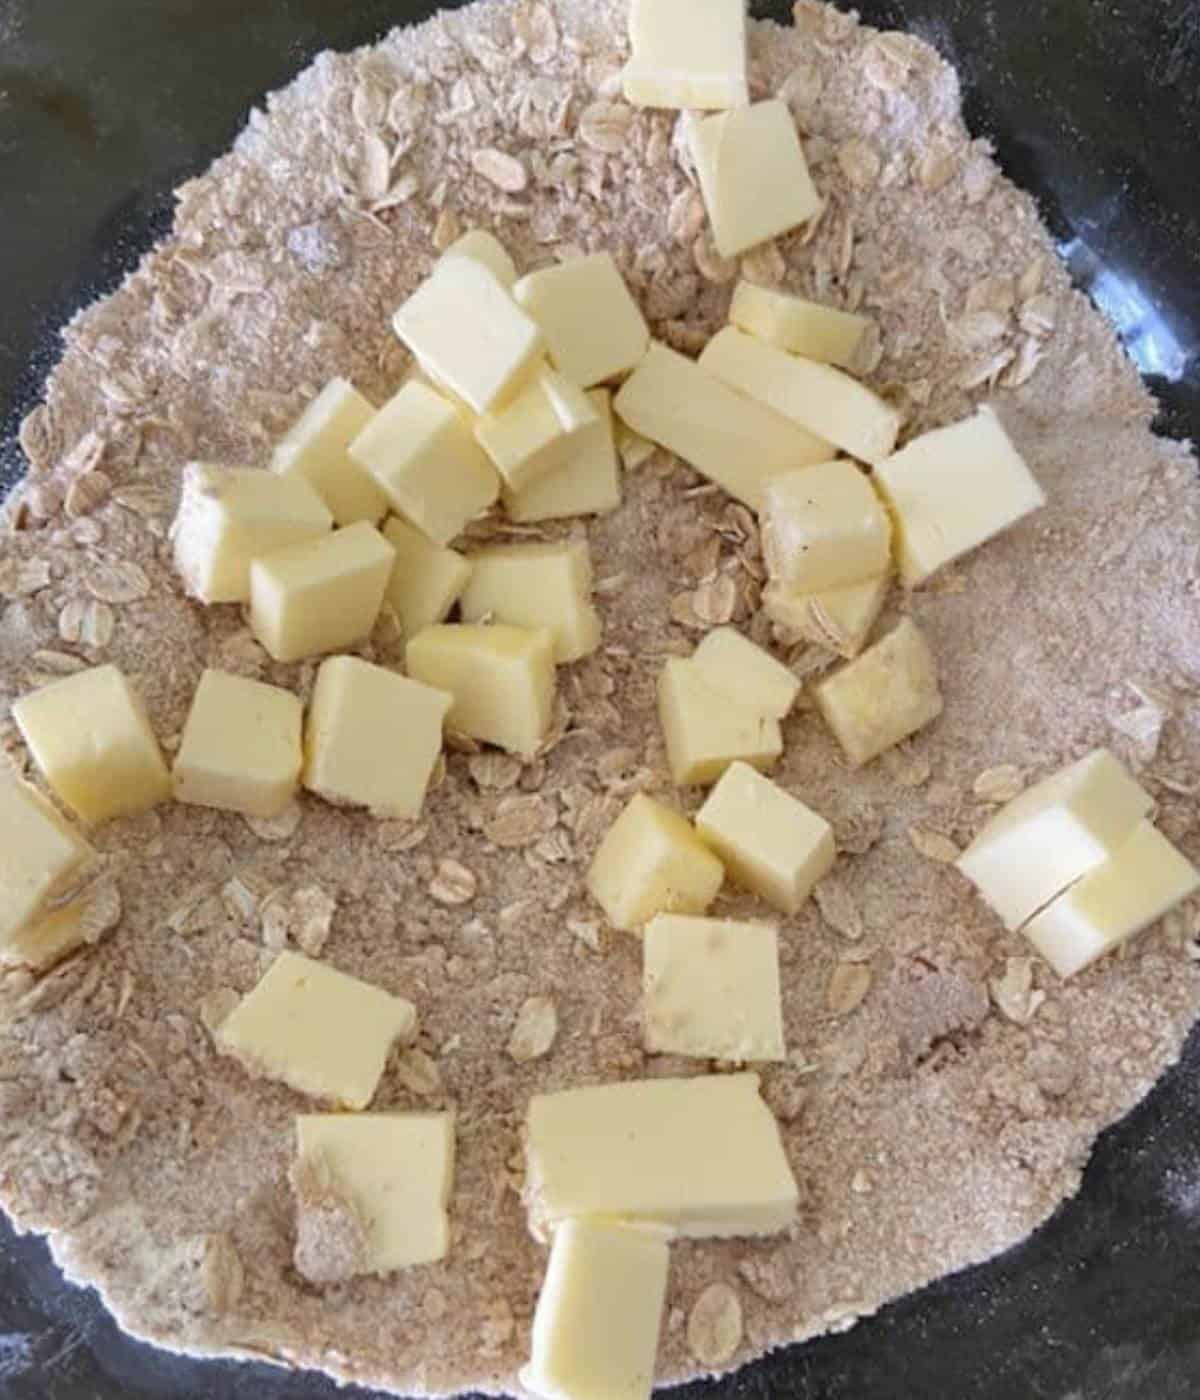 Butter added to crumble ingredients.